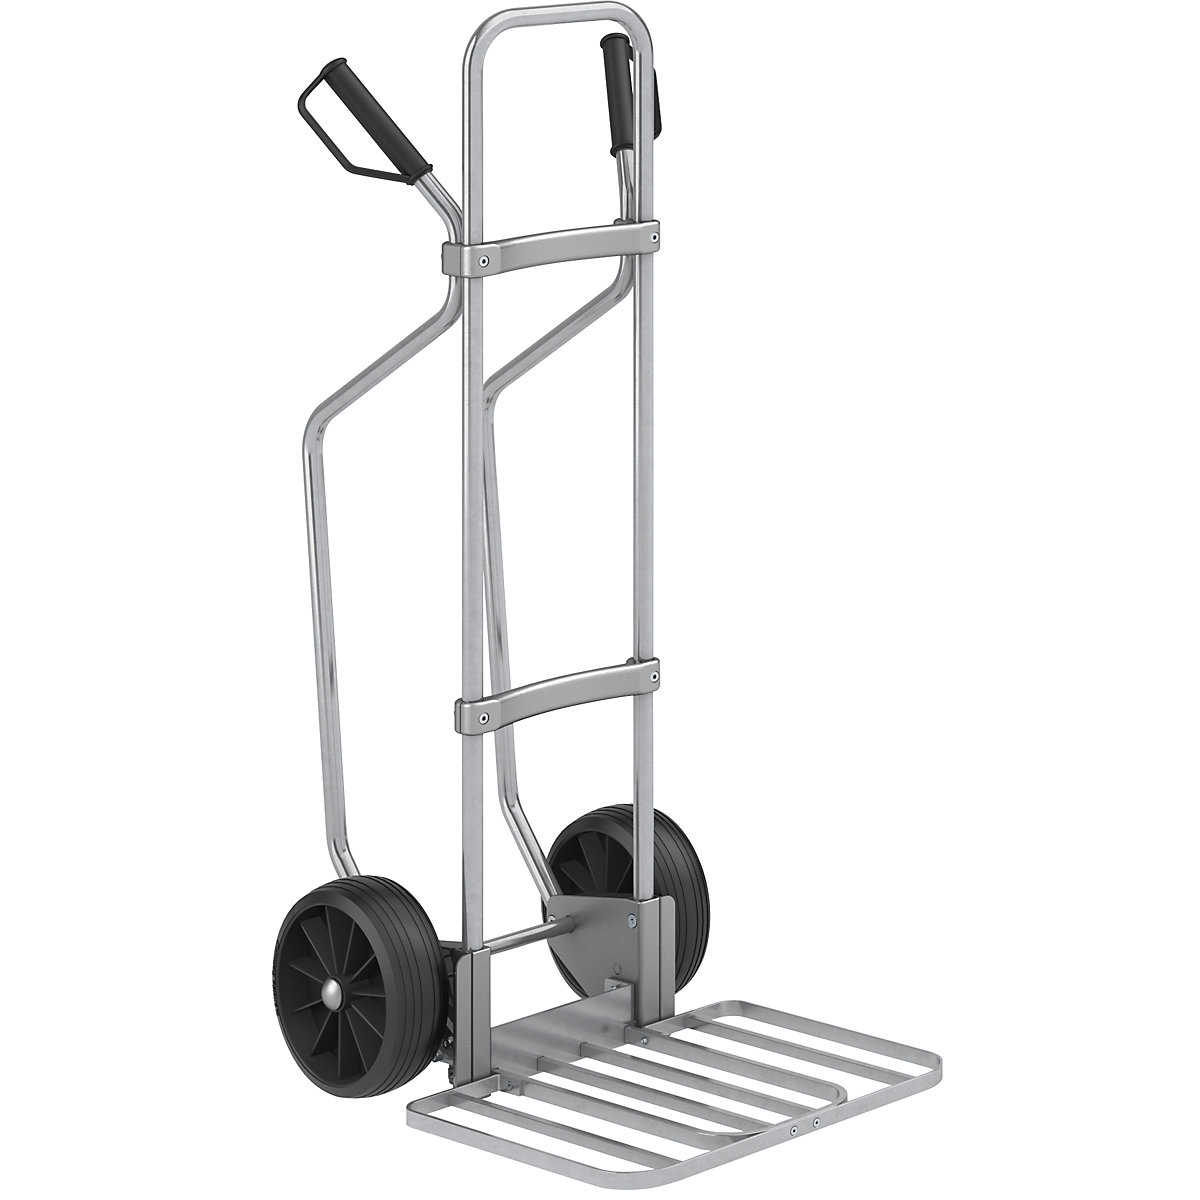 Sack truck with runners, zinc plated – eurokraft pro, parcel footplate WxD 430 x 450 mm, zinc plated, solid rubber tyres, 2+ items-2